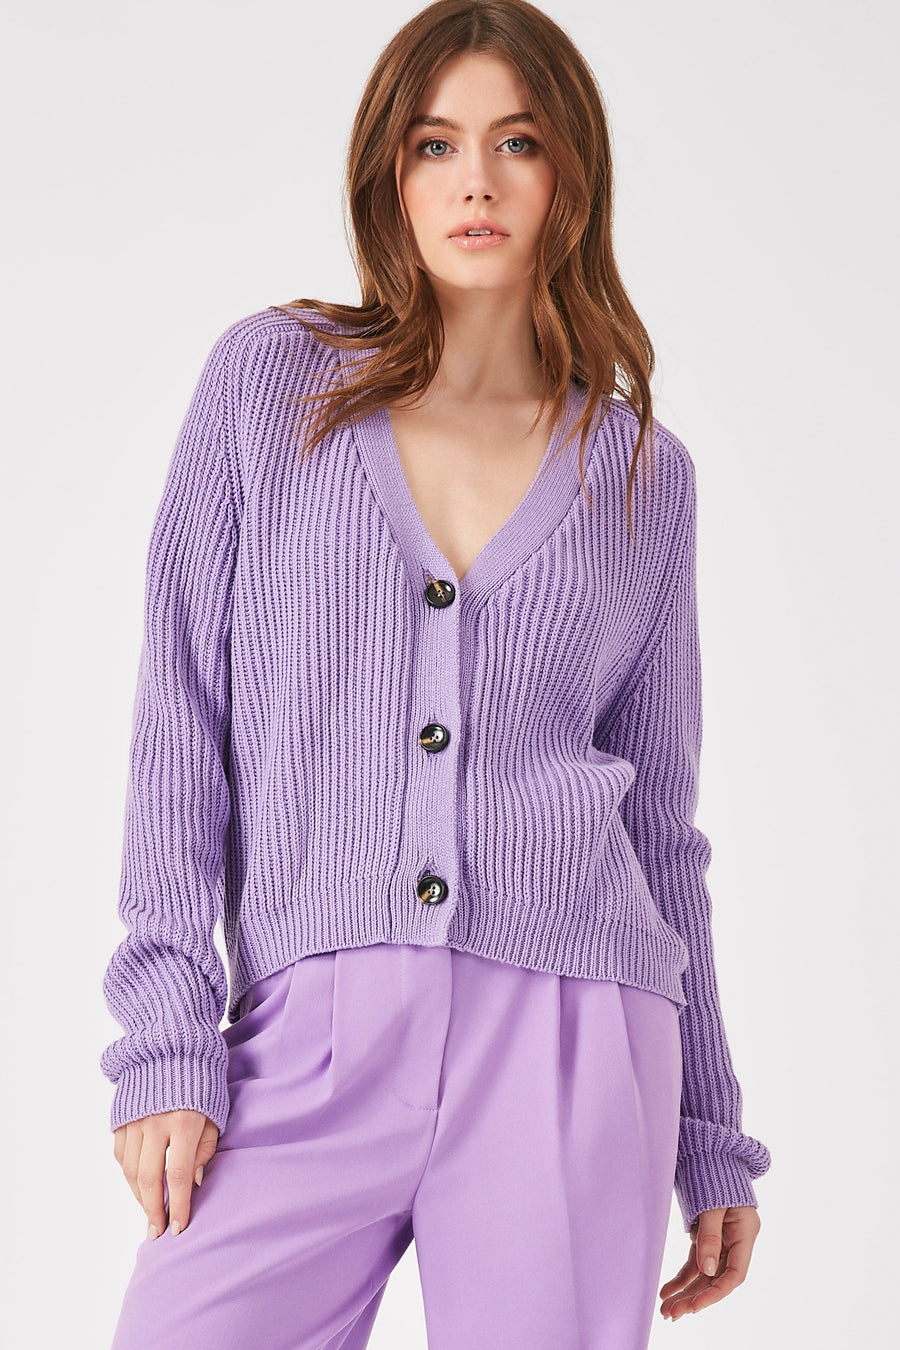 THE OLIPHANT CARDIGAN RADIANT - ORCHID